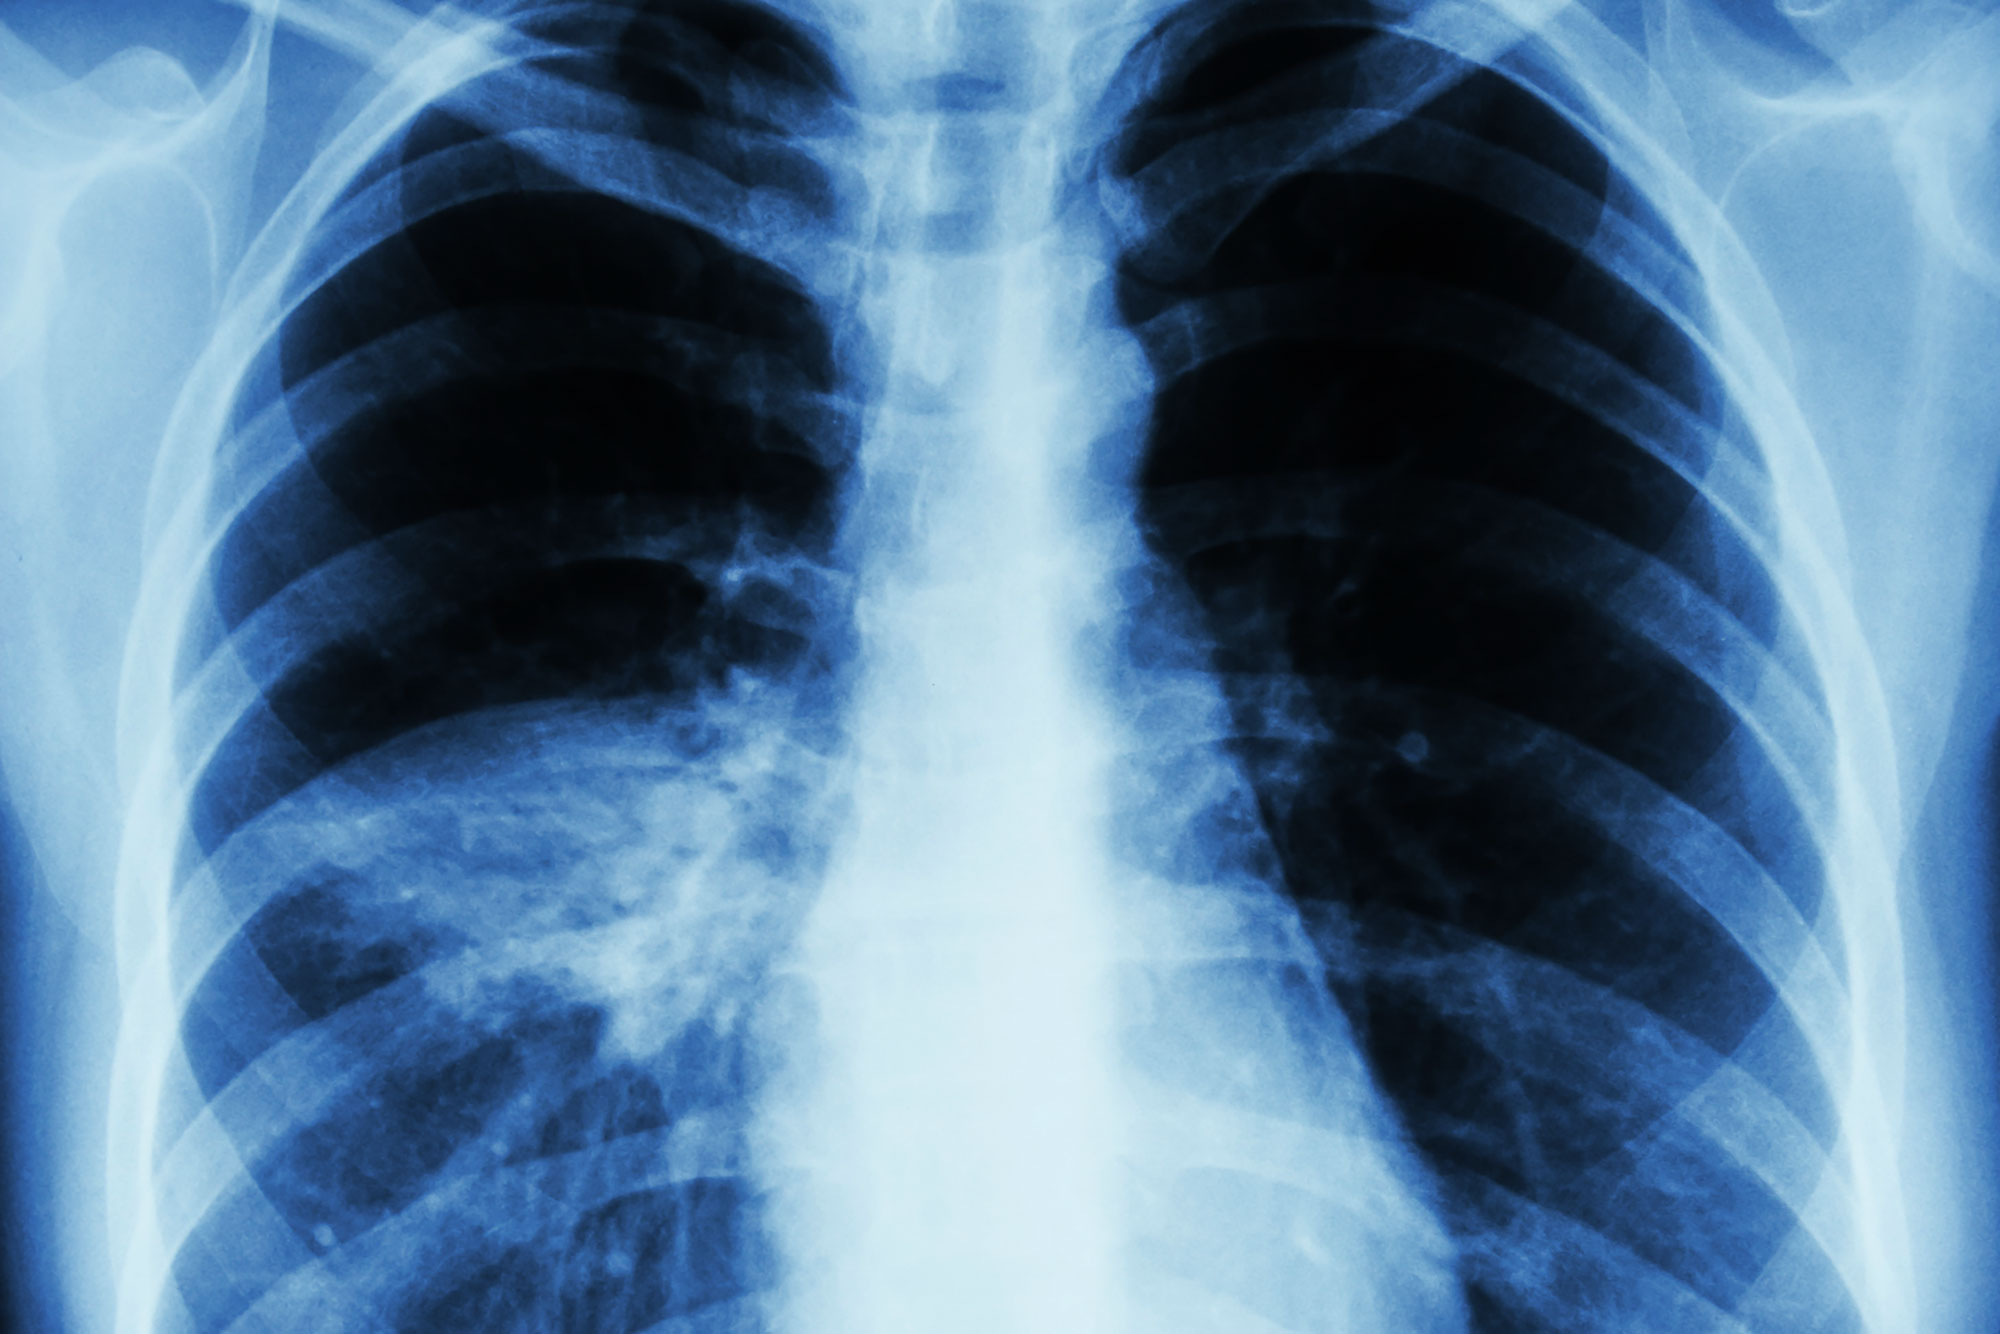 Xray of a persons chest